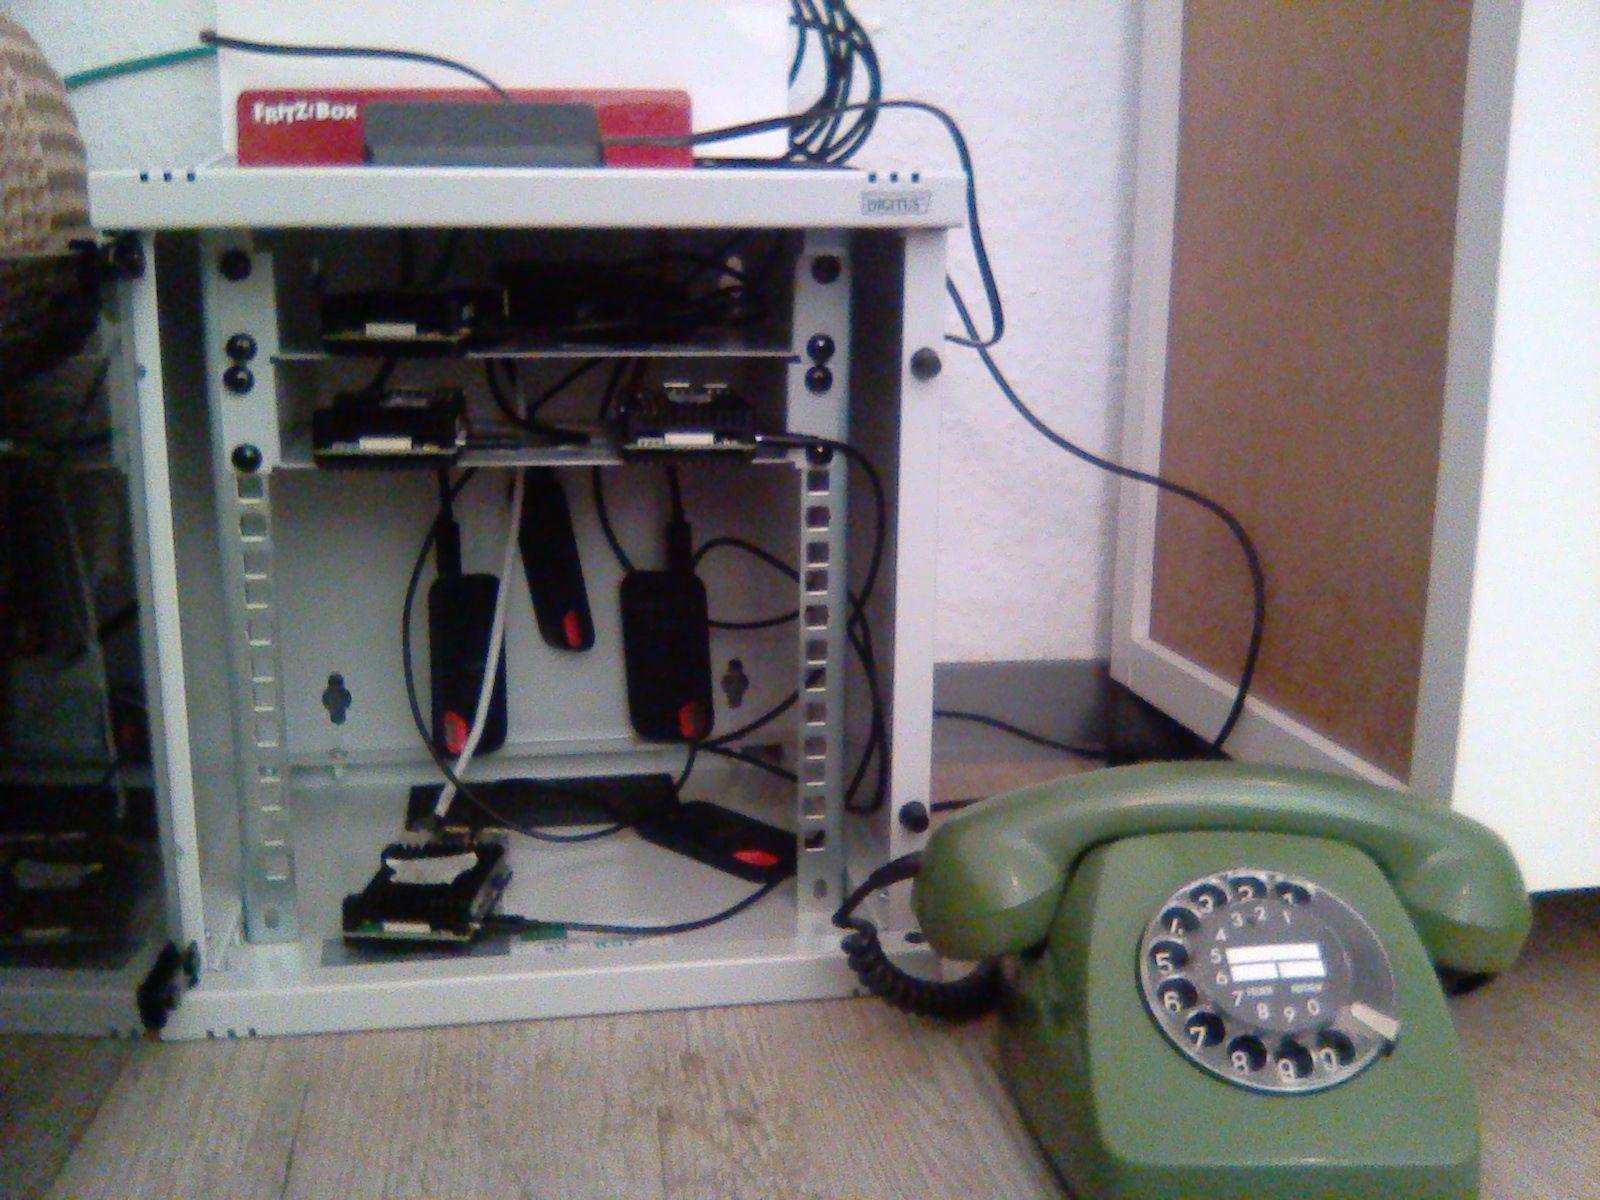 A small network rack with 4 Raspberry Pis in it, a wifi router on top and a phone next to it